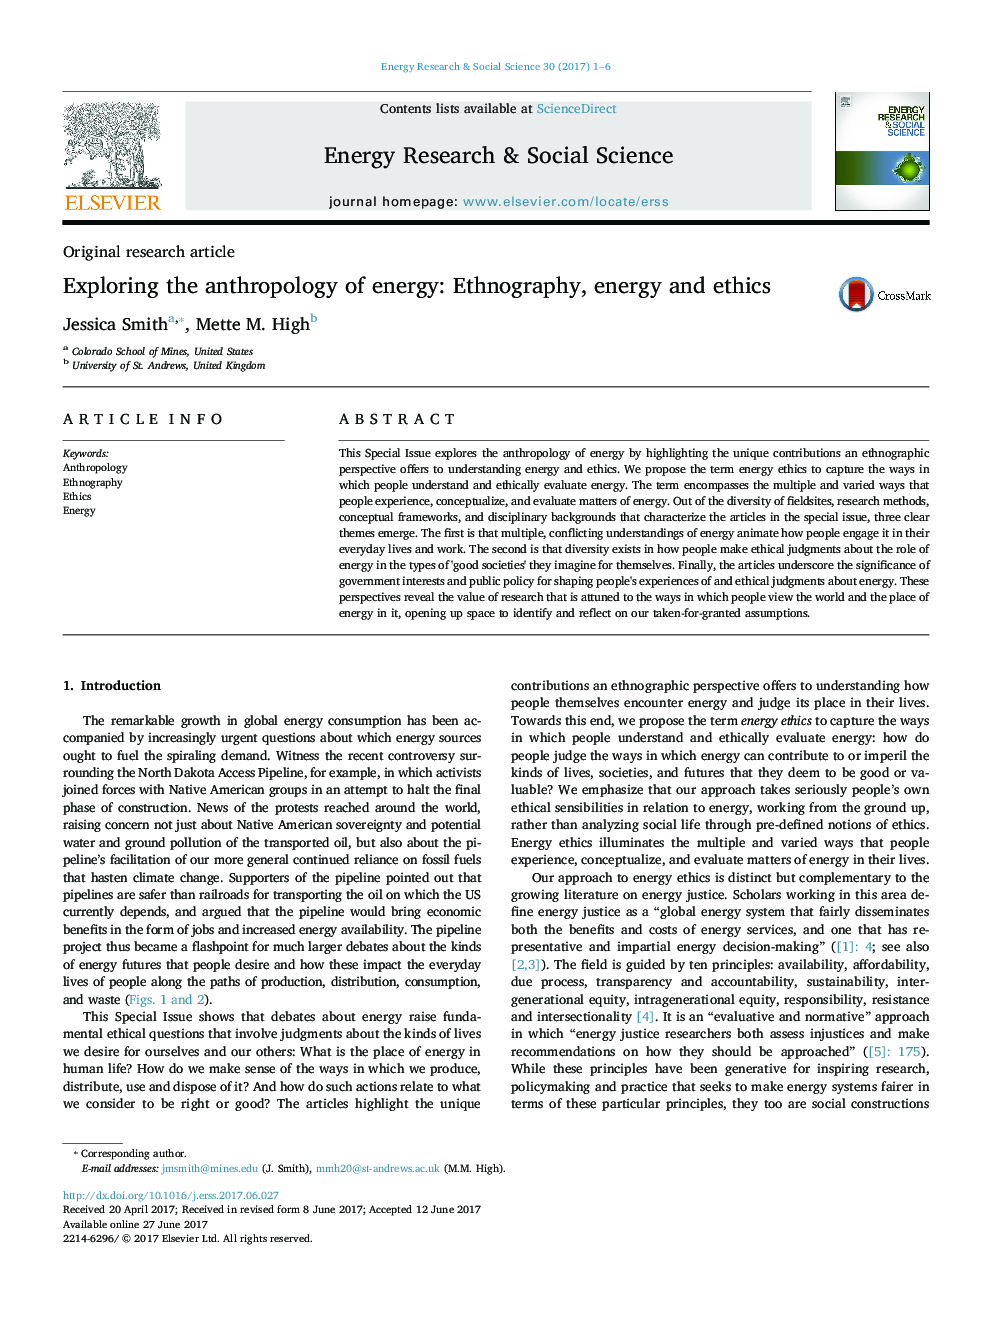 Exploring the anthropology of energy: Ethnography, energy and ethics